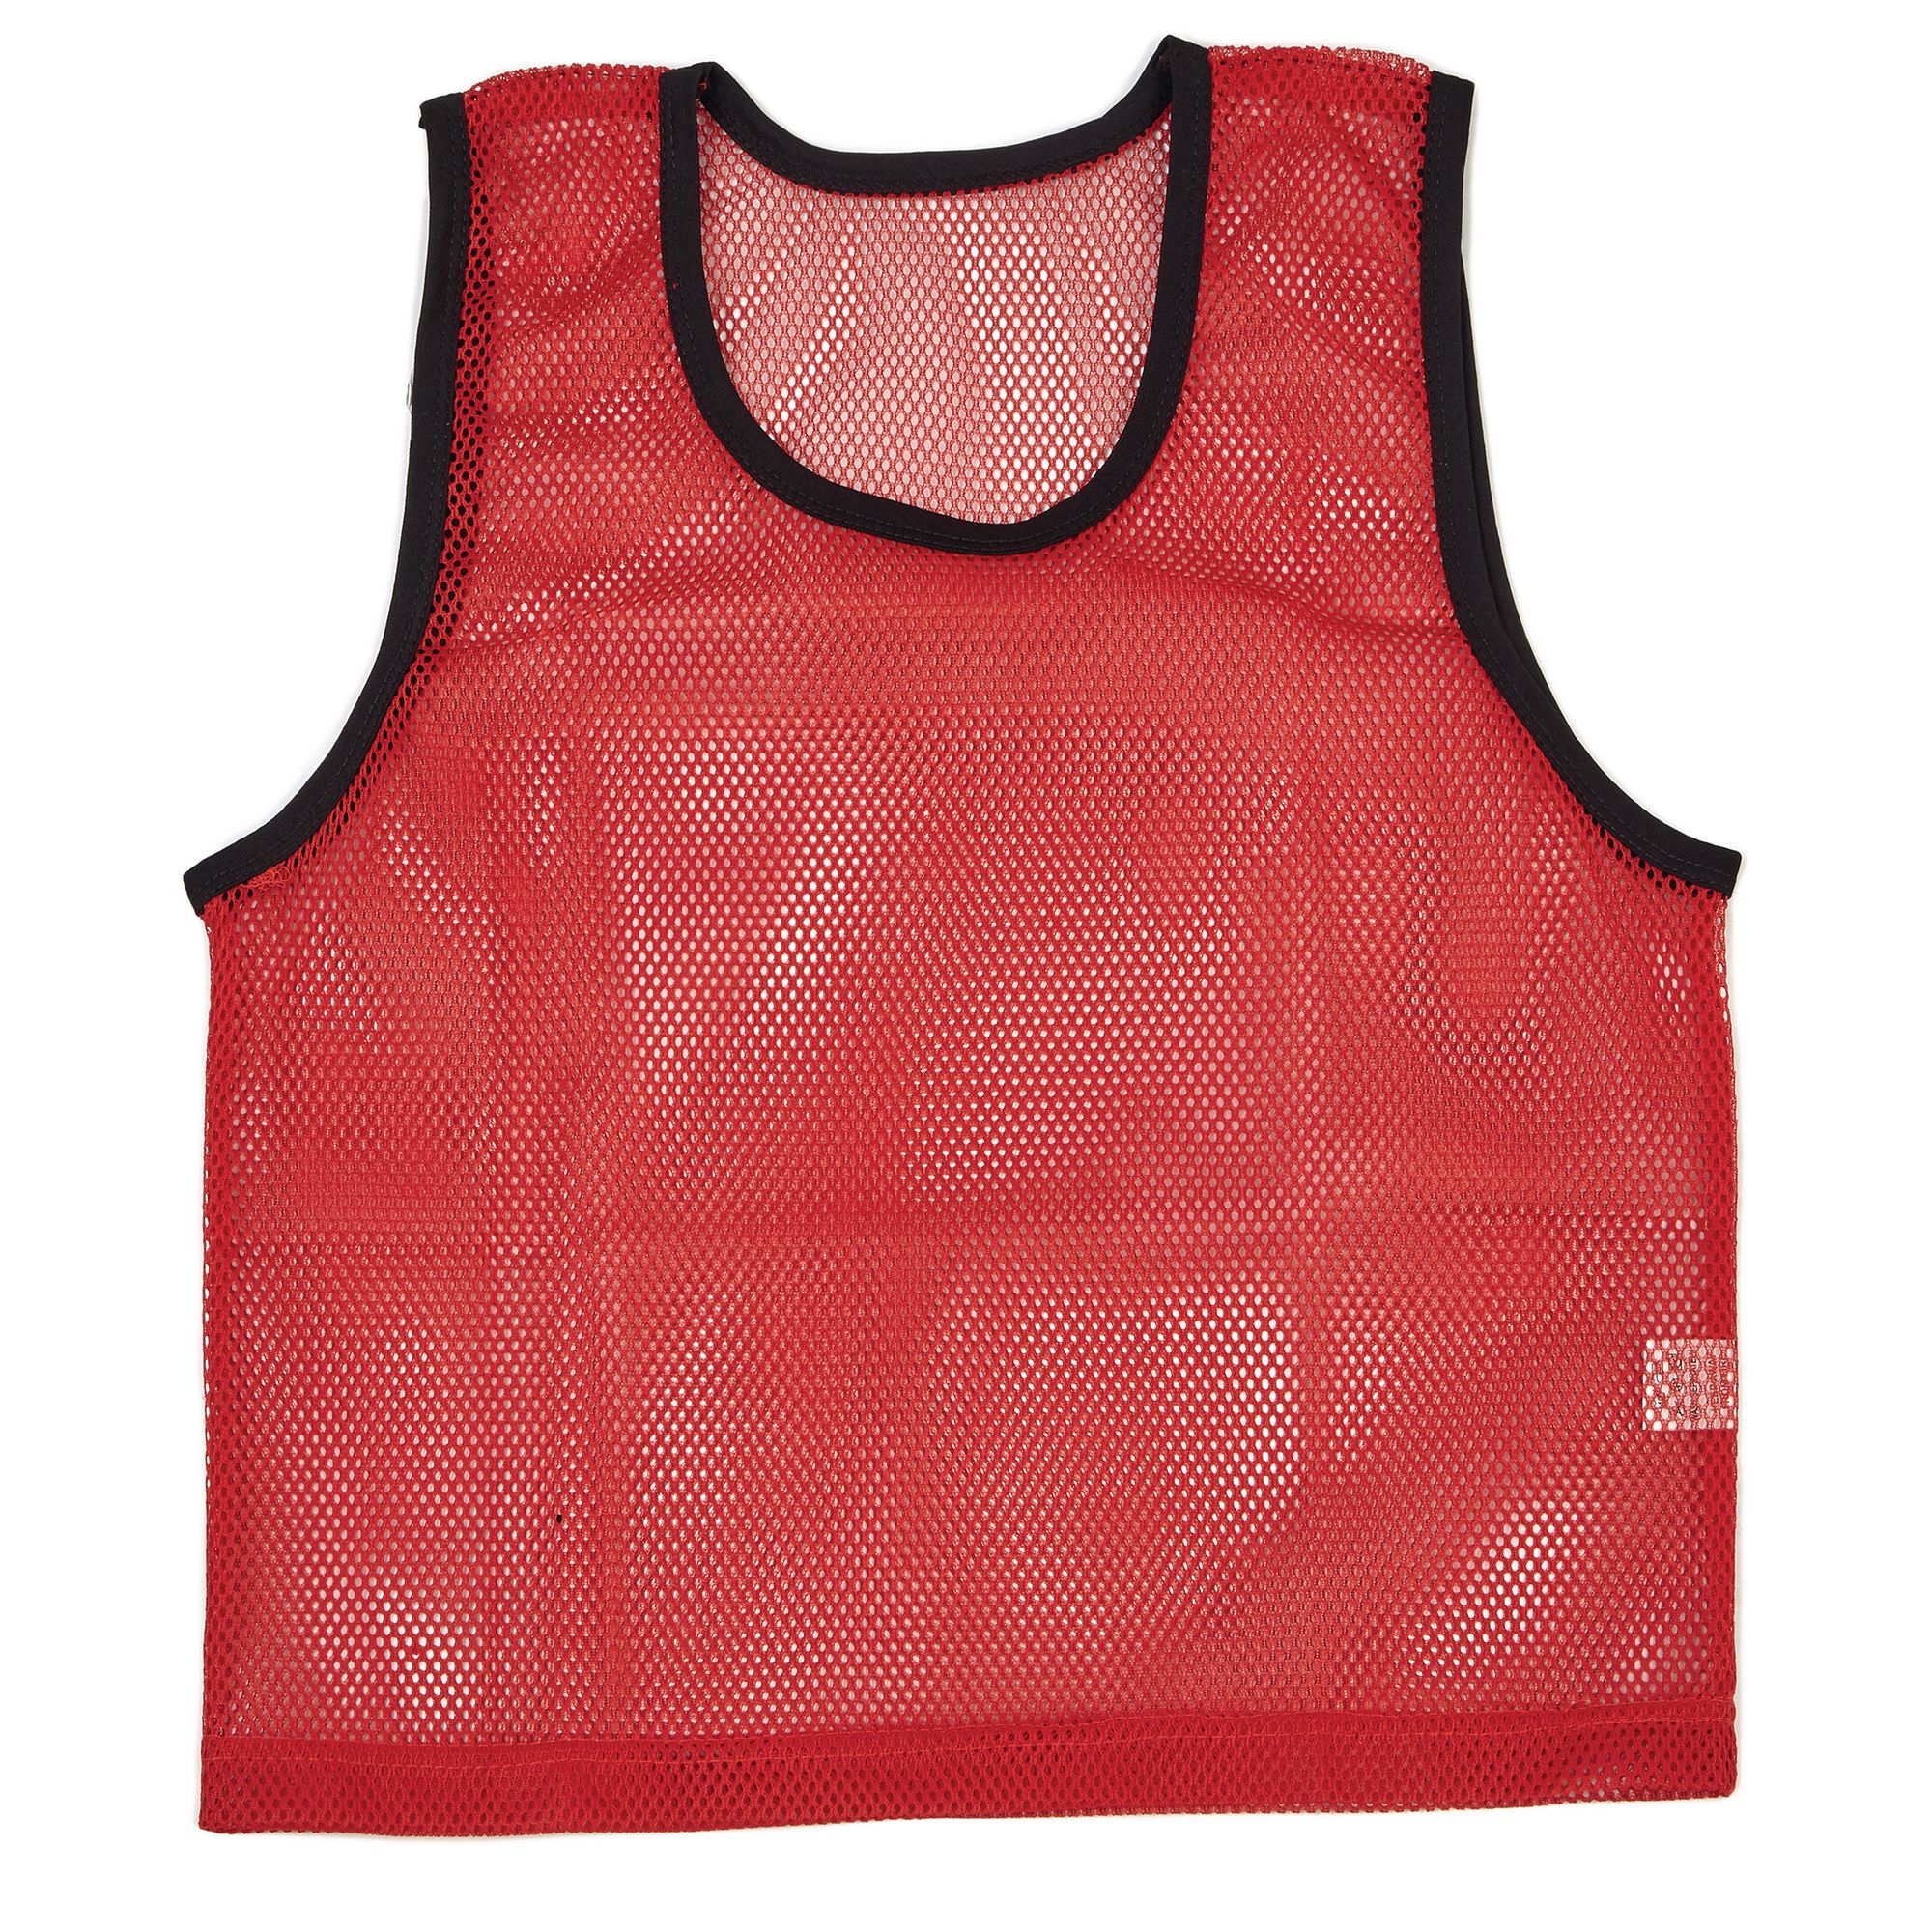 Mesh Training Vest, Small - Red